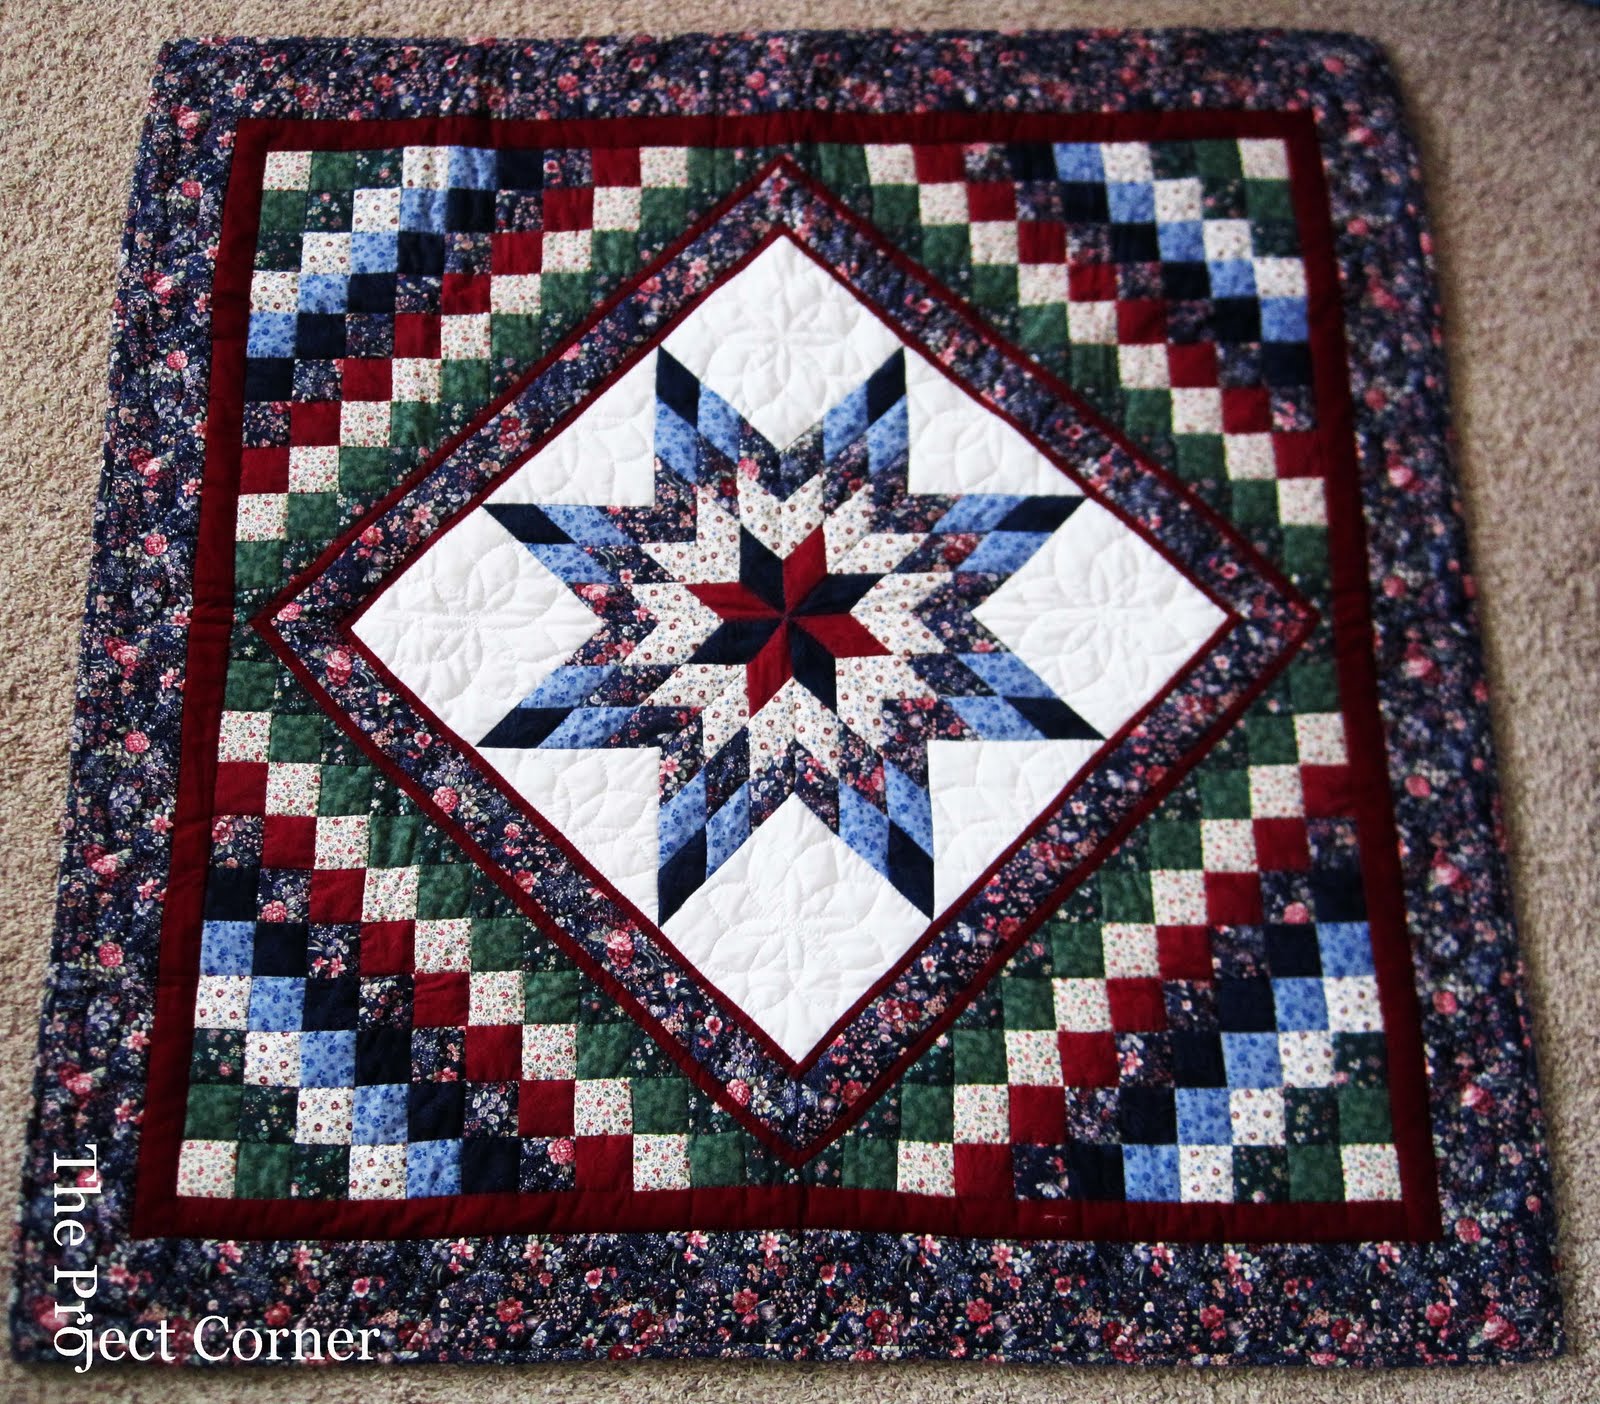 the-project-corner-amish-quilt